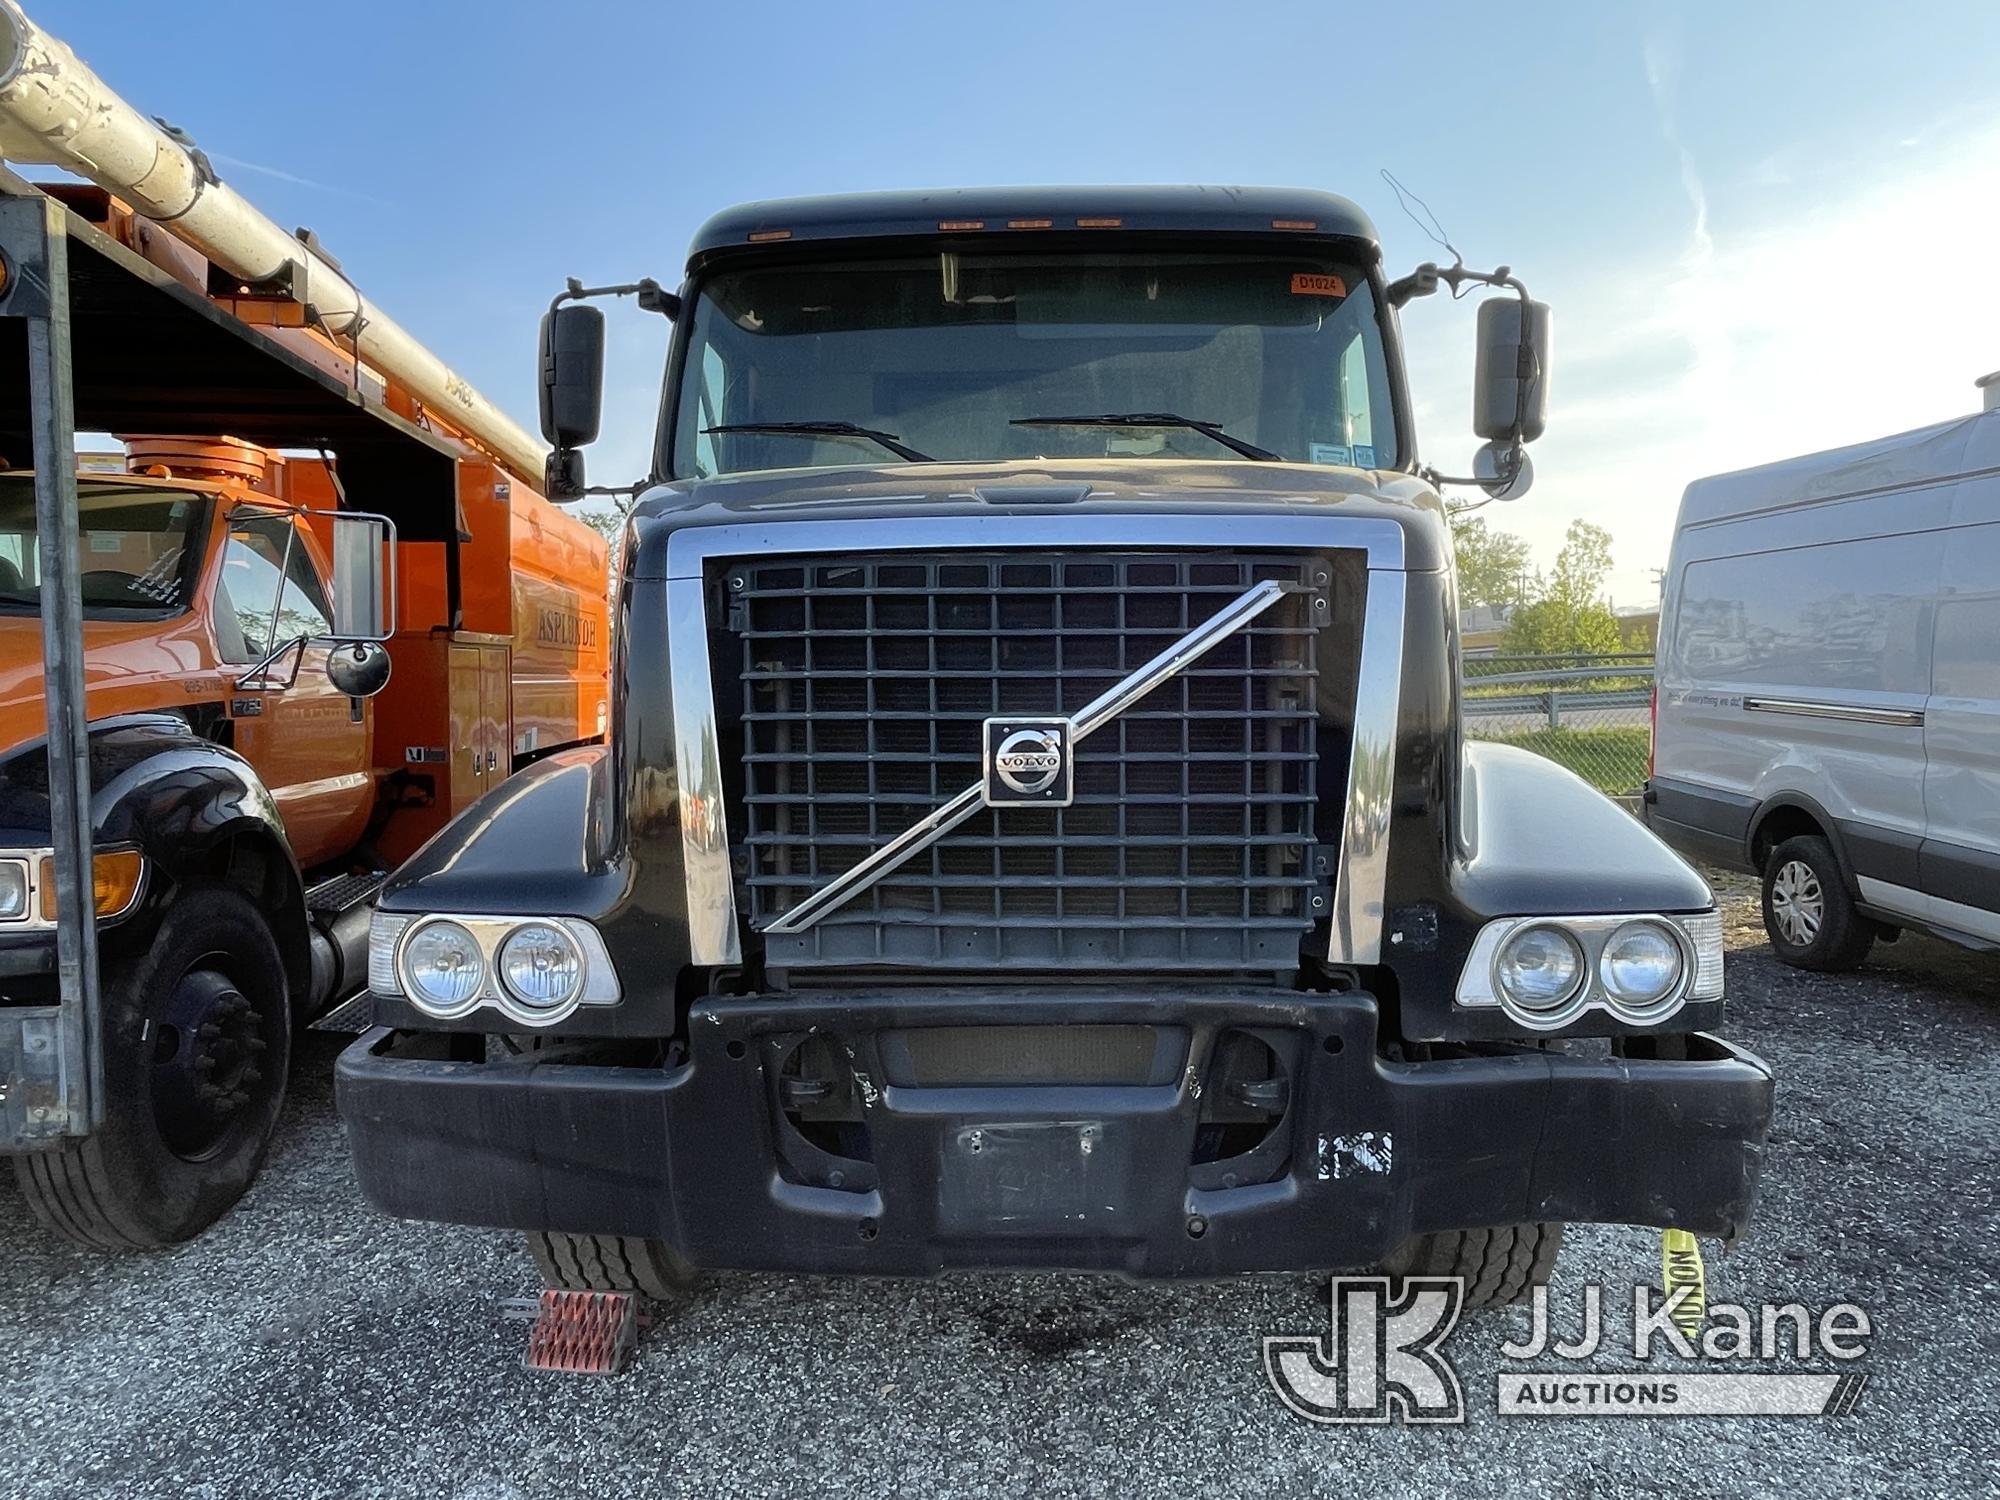 (Plymouth Meeting, PA) 2007 Volvo VHD Tri-Axle Dump Truck Blown Engine, Not Running Condition Unknow